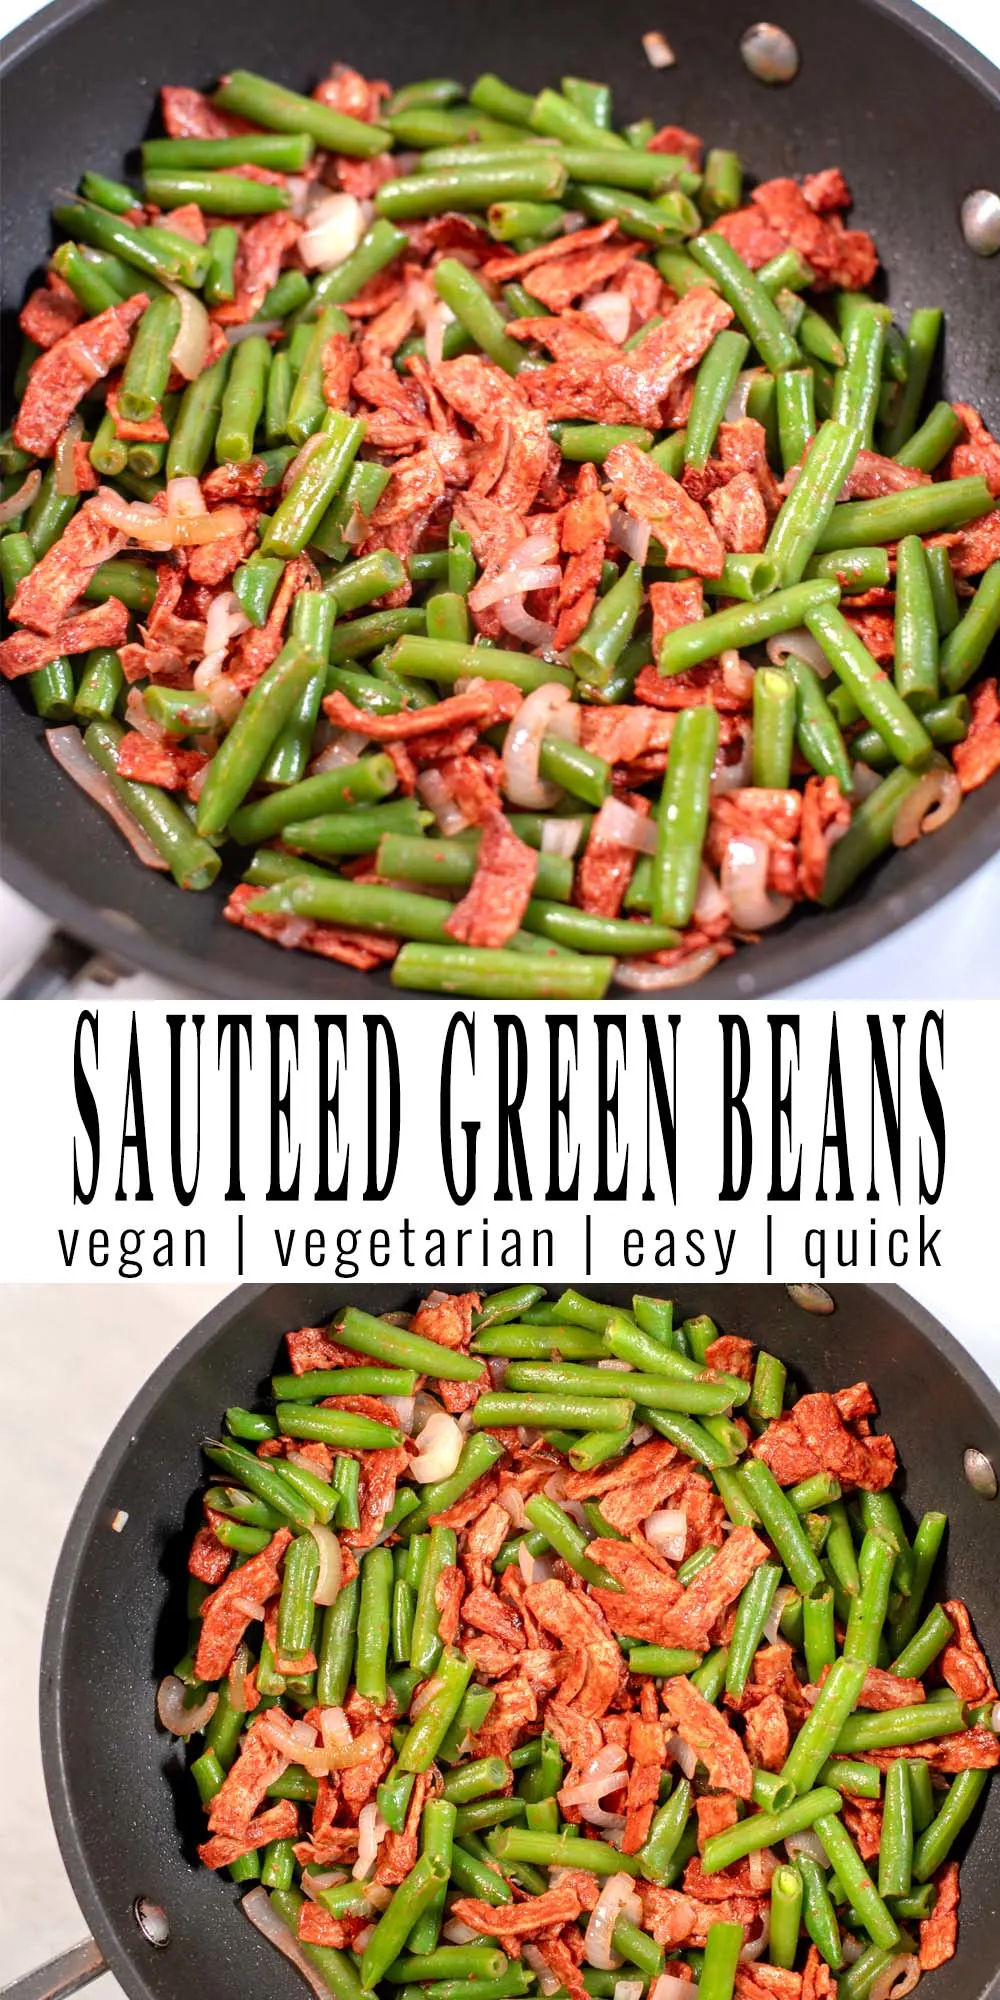 Collage of two photos showing Green Beans with Bacon.